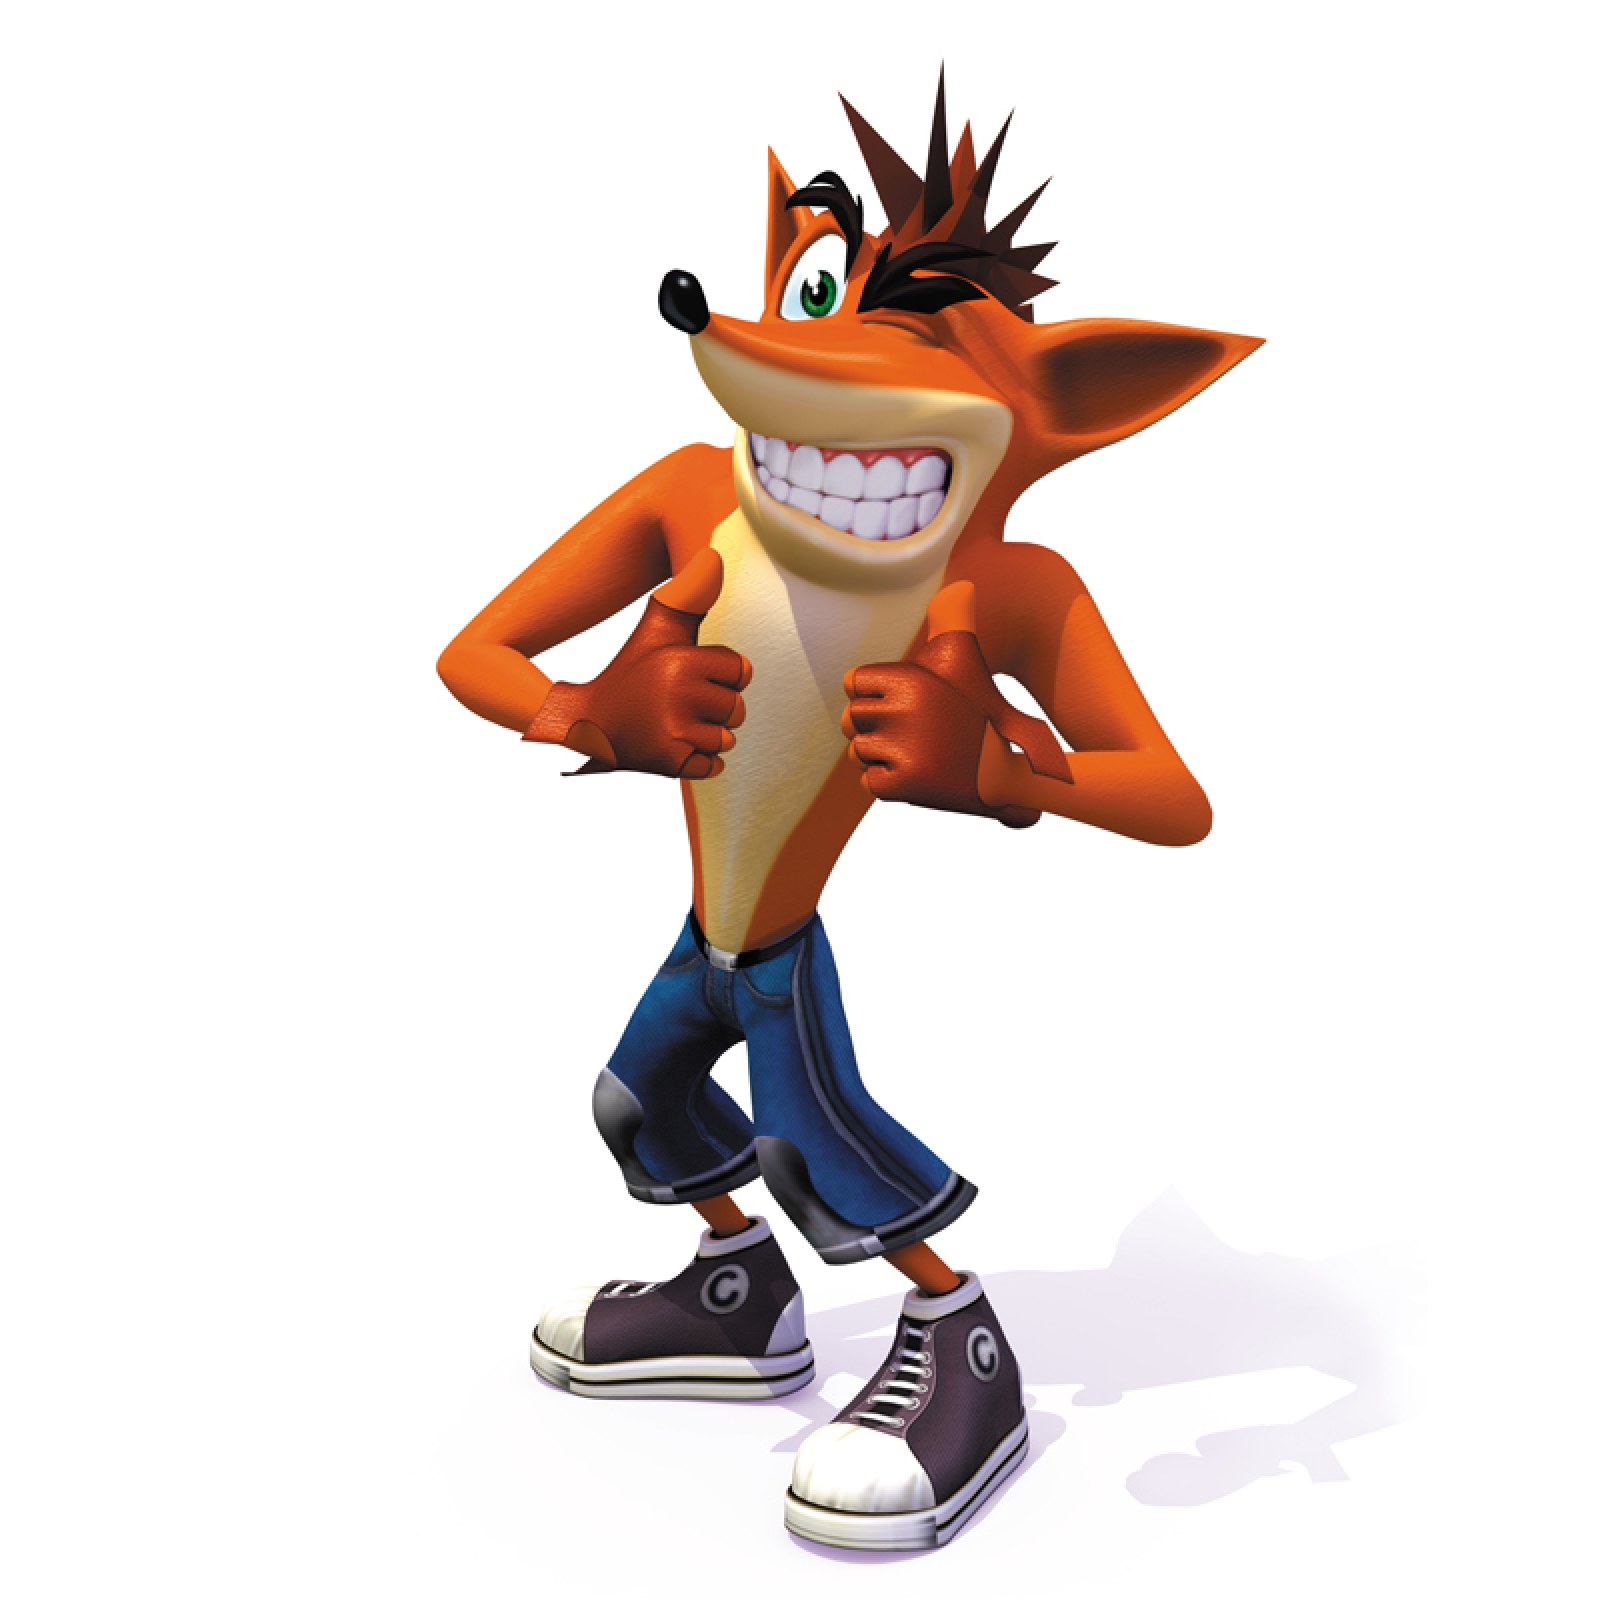 E3 2016: Sony confirms Crash Bandicoot remakes are coming to PS4